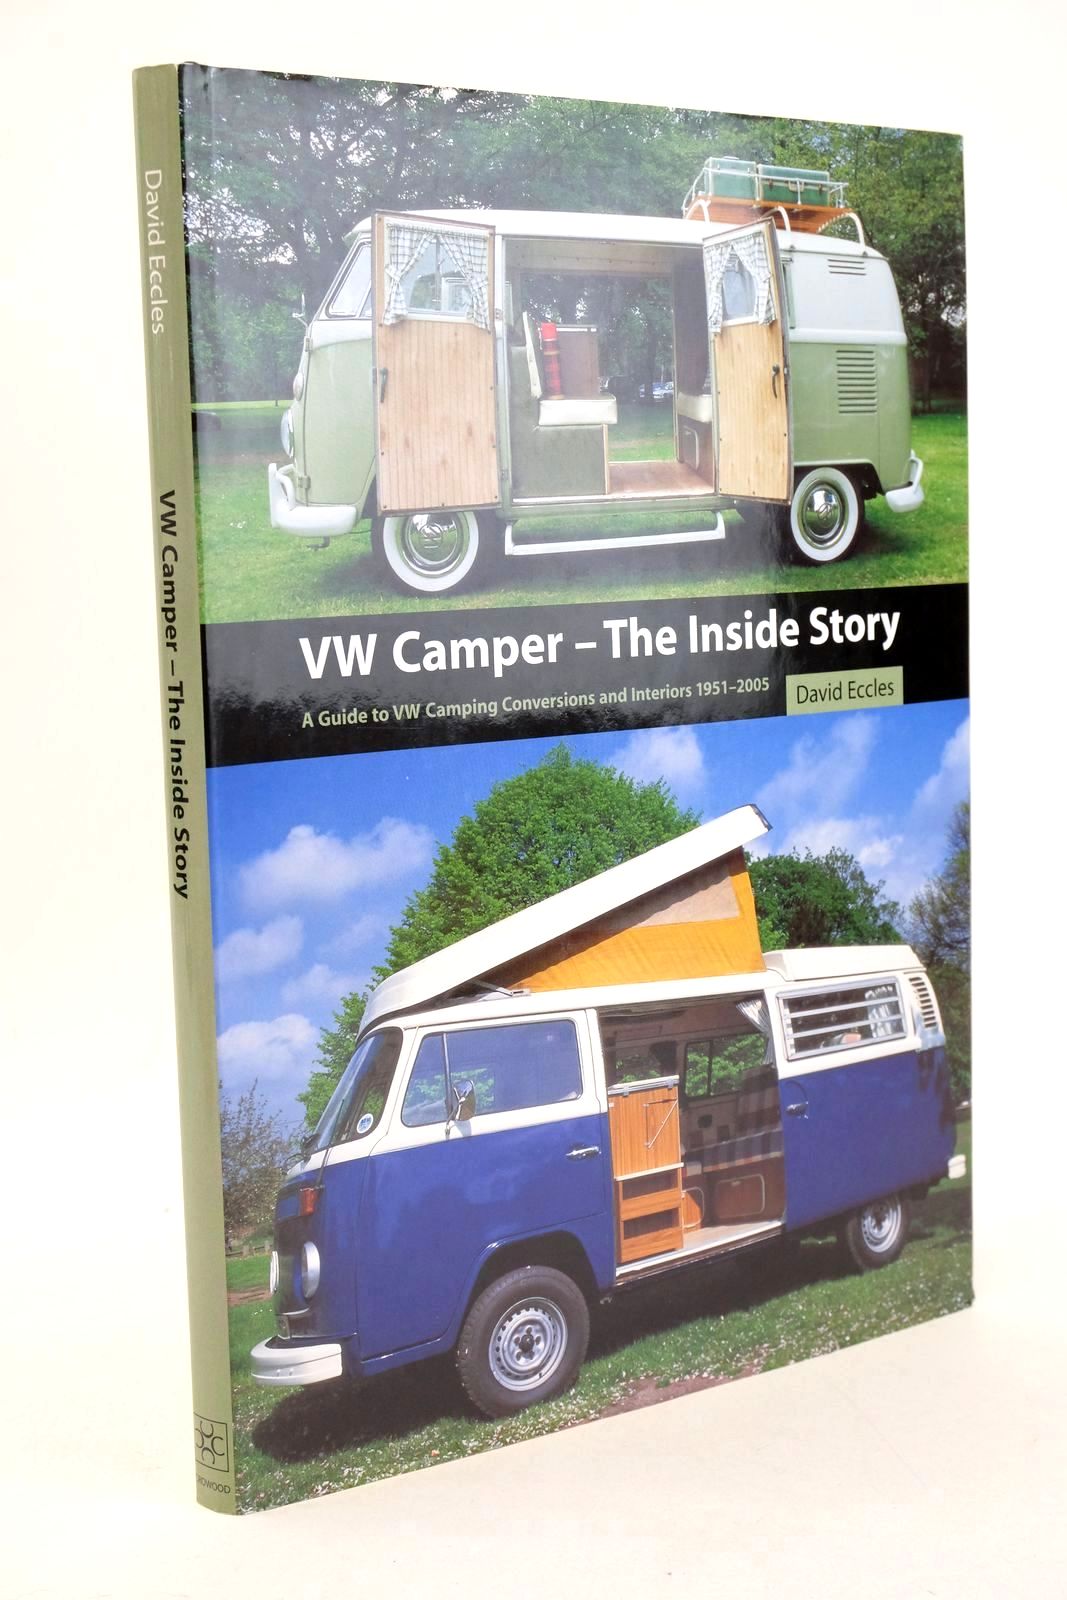 Photo of VW CAMPER - THE INSIDE STORY written by Eccles, David published by The Crowood Press (STOCK CODE: 1327826)  for sale by Stella & Rose's Books